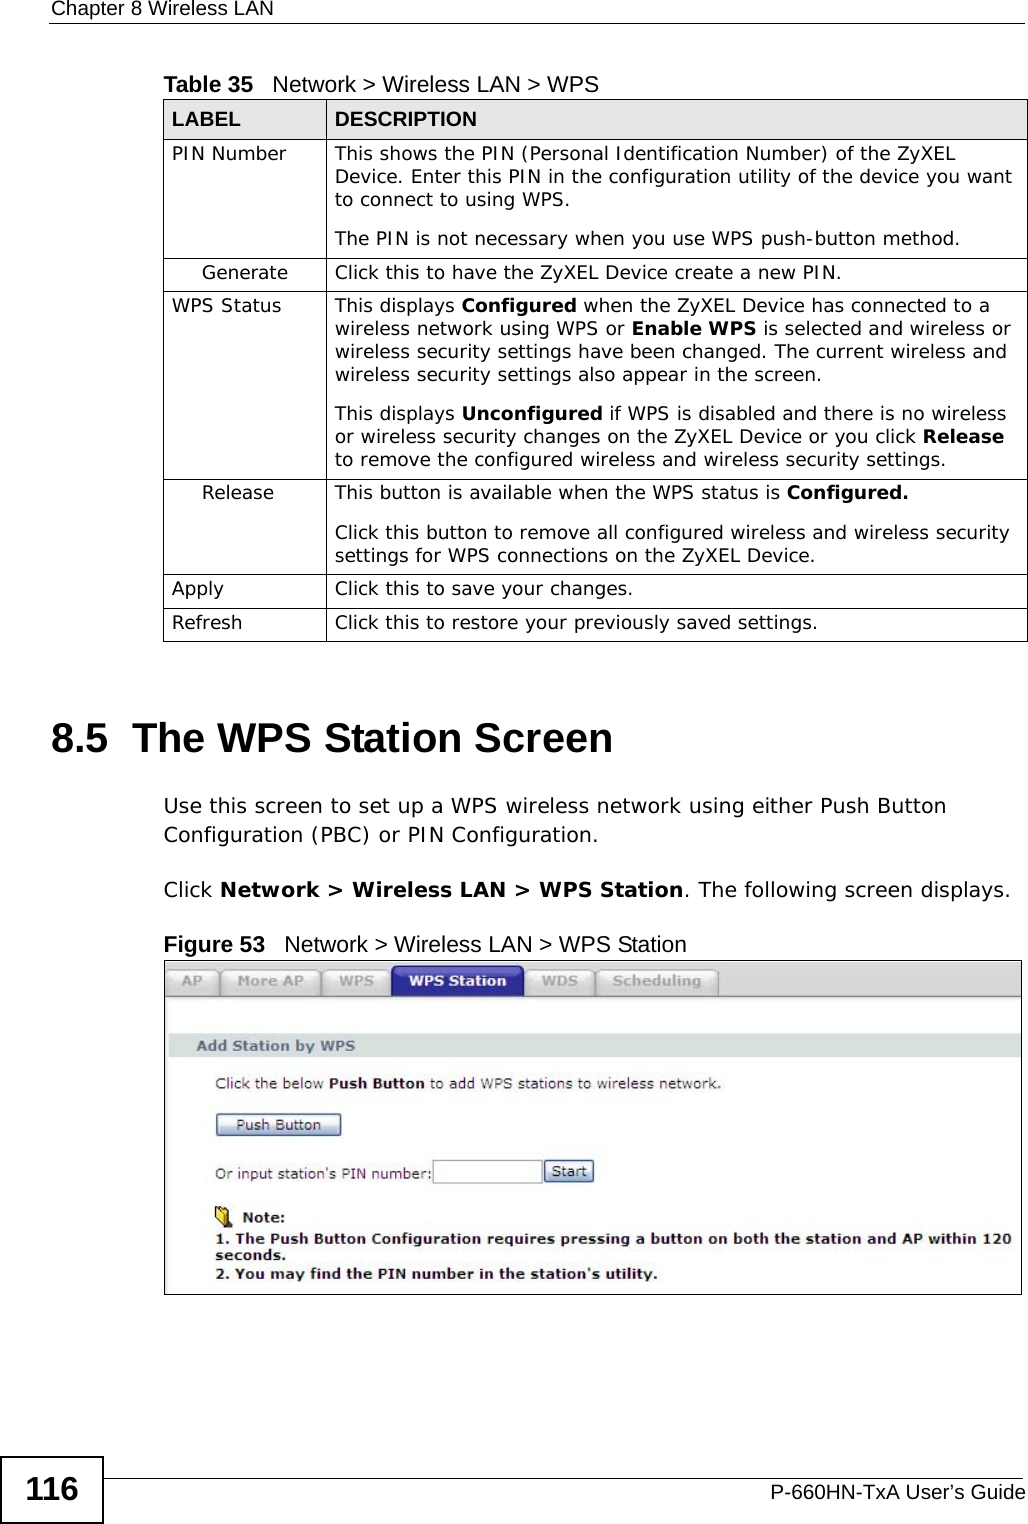 Chapter 8 Wireless LANP-660HN-TxA User’s Guide1168.5  The WPS Station ScreenUse this screen to set up a WPS wireless network using either Push Button Configuration (PBC) or PIN Configuration.Click Network &gt; Wireless LAN &gt; WPS Station. The following screen displays.Figure 53   Network &gt; Wireless LAN &gt; WPS StationPIN Number This shows the PIN (Personal Identification Number) of the ZyXEL Device. Enter this PIN in the configuration utility of the device you want to connect to using WPS.The PIN is not necessary when you use WPS push-button method.Generate Click this to have the ZyXEL Device create a new PIN. WPS Status This displays Configured when the ZyXEL Device has connected to a wireless network using WPS or Enable WPS is selected and wireless or wireless security settings have been changed. The current wireless and wireless security settings also appear in the screen.This displays Unconfigured if WPS is disabled and there is no wireless or wireless security changes on the ZyXEL Device or you click Release to remove the configured wireless and wireless security settings.Release This button is available when the WPS status is Configured.Click this button to remove all configured wireless and wireless security settings for WPS connections on the ZyXEL Device.Apply Click this to save your changes.Refresh Click this to restore your previously saved settings.Table 35   Network &gt; Wireless LAN &gt; WPSLABEL DESCRIPTION